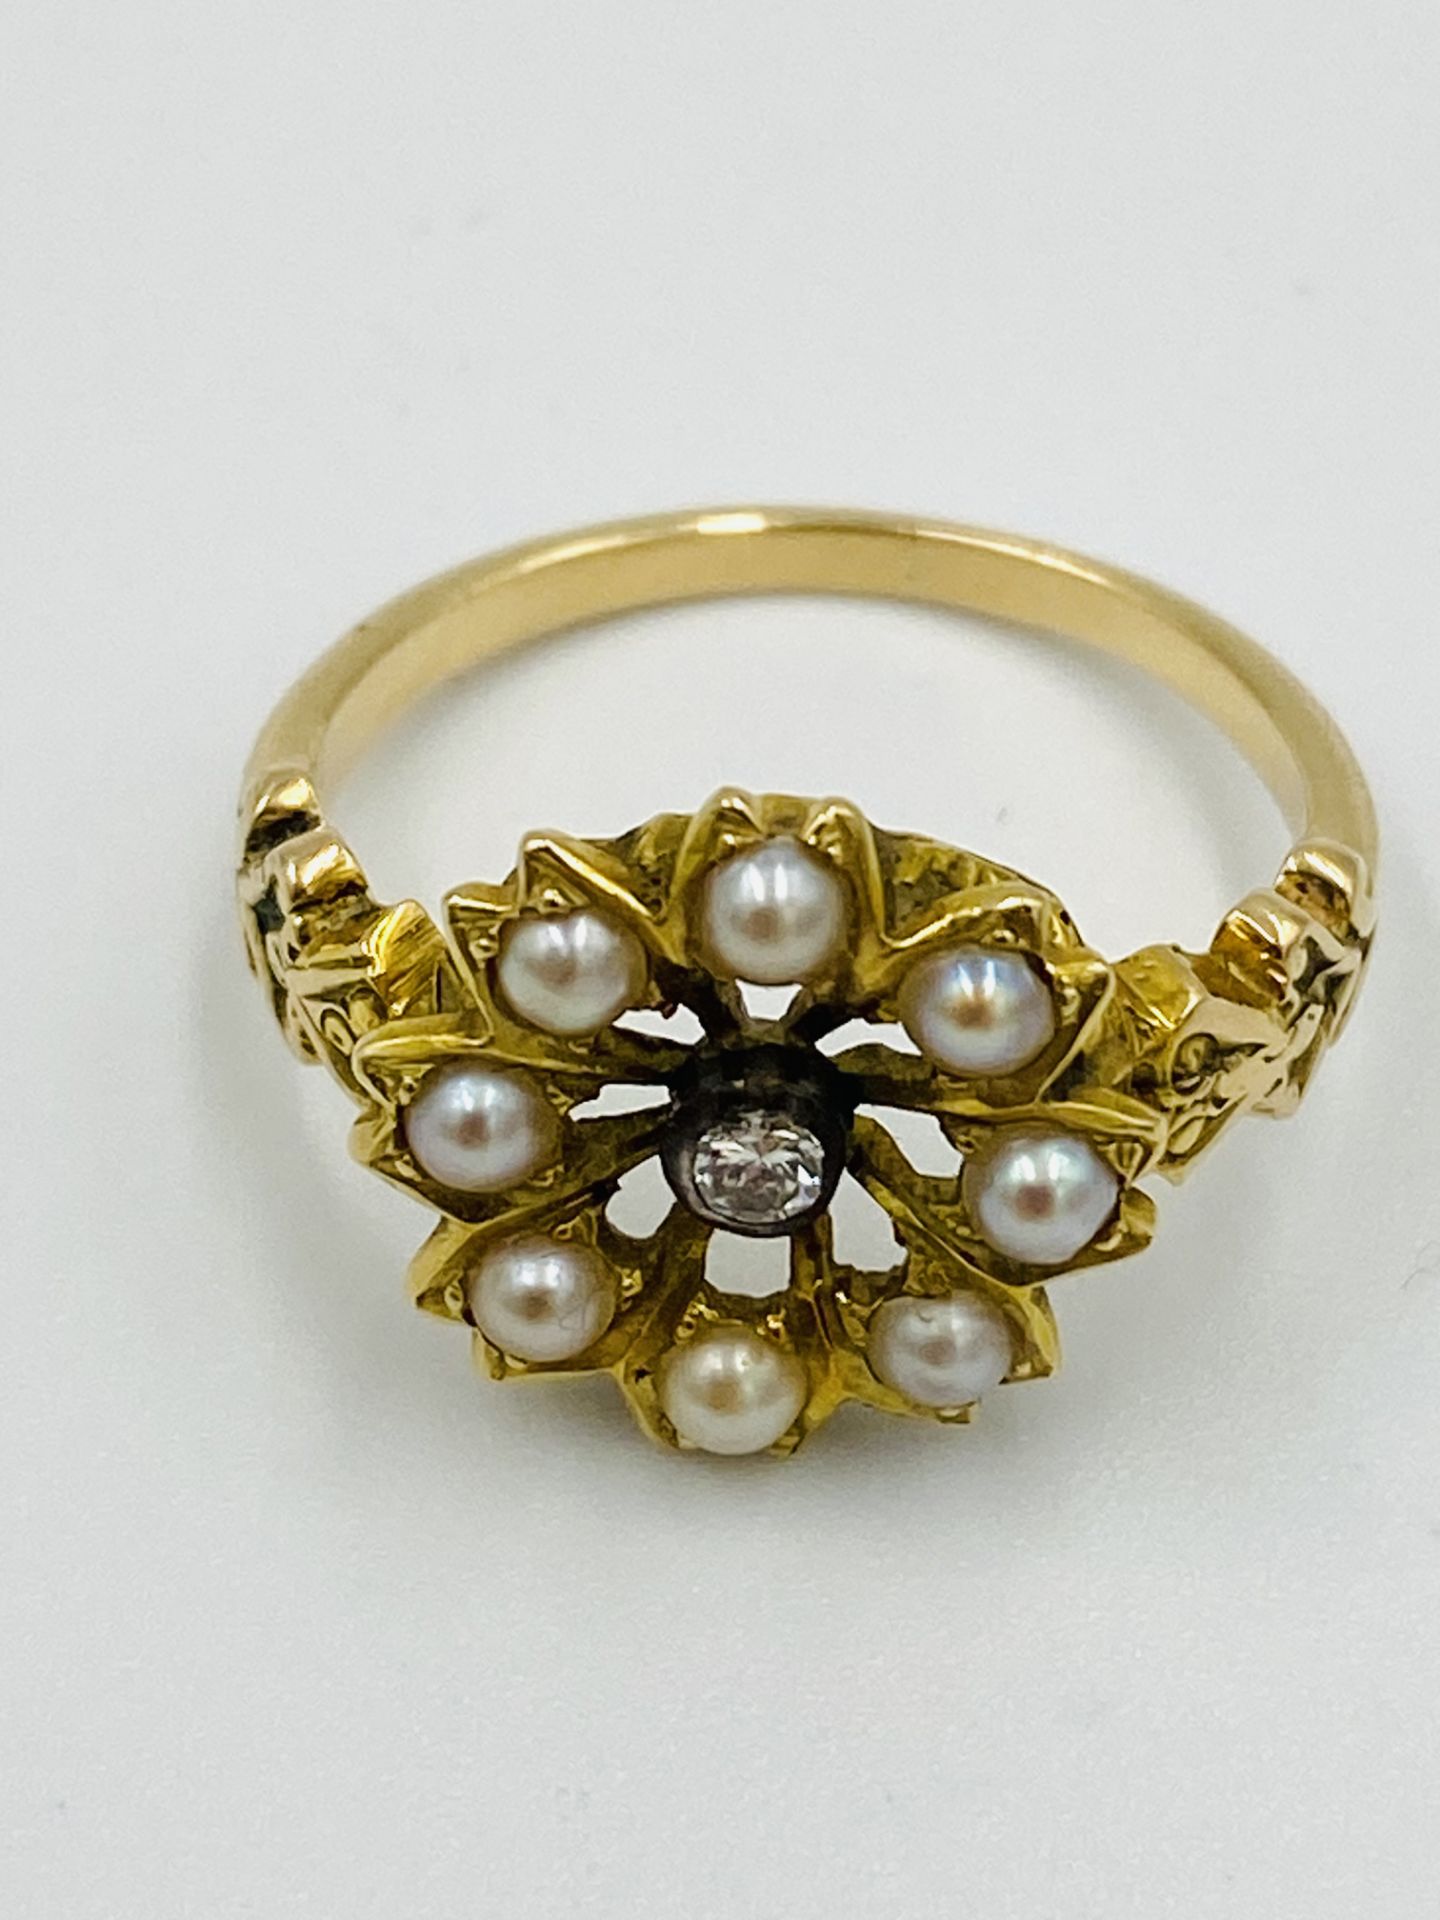 Gold, diamond and seed pearl ring - Image 4 of 4